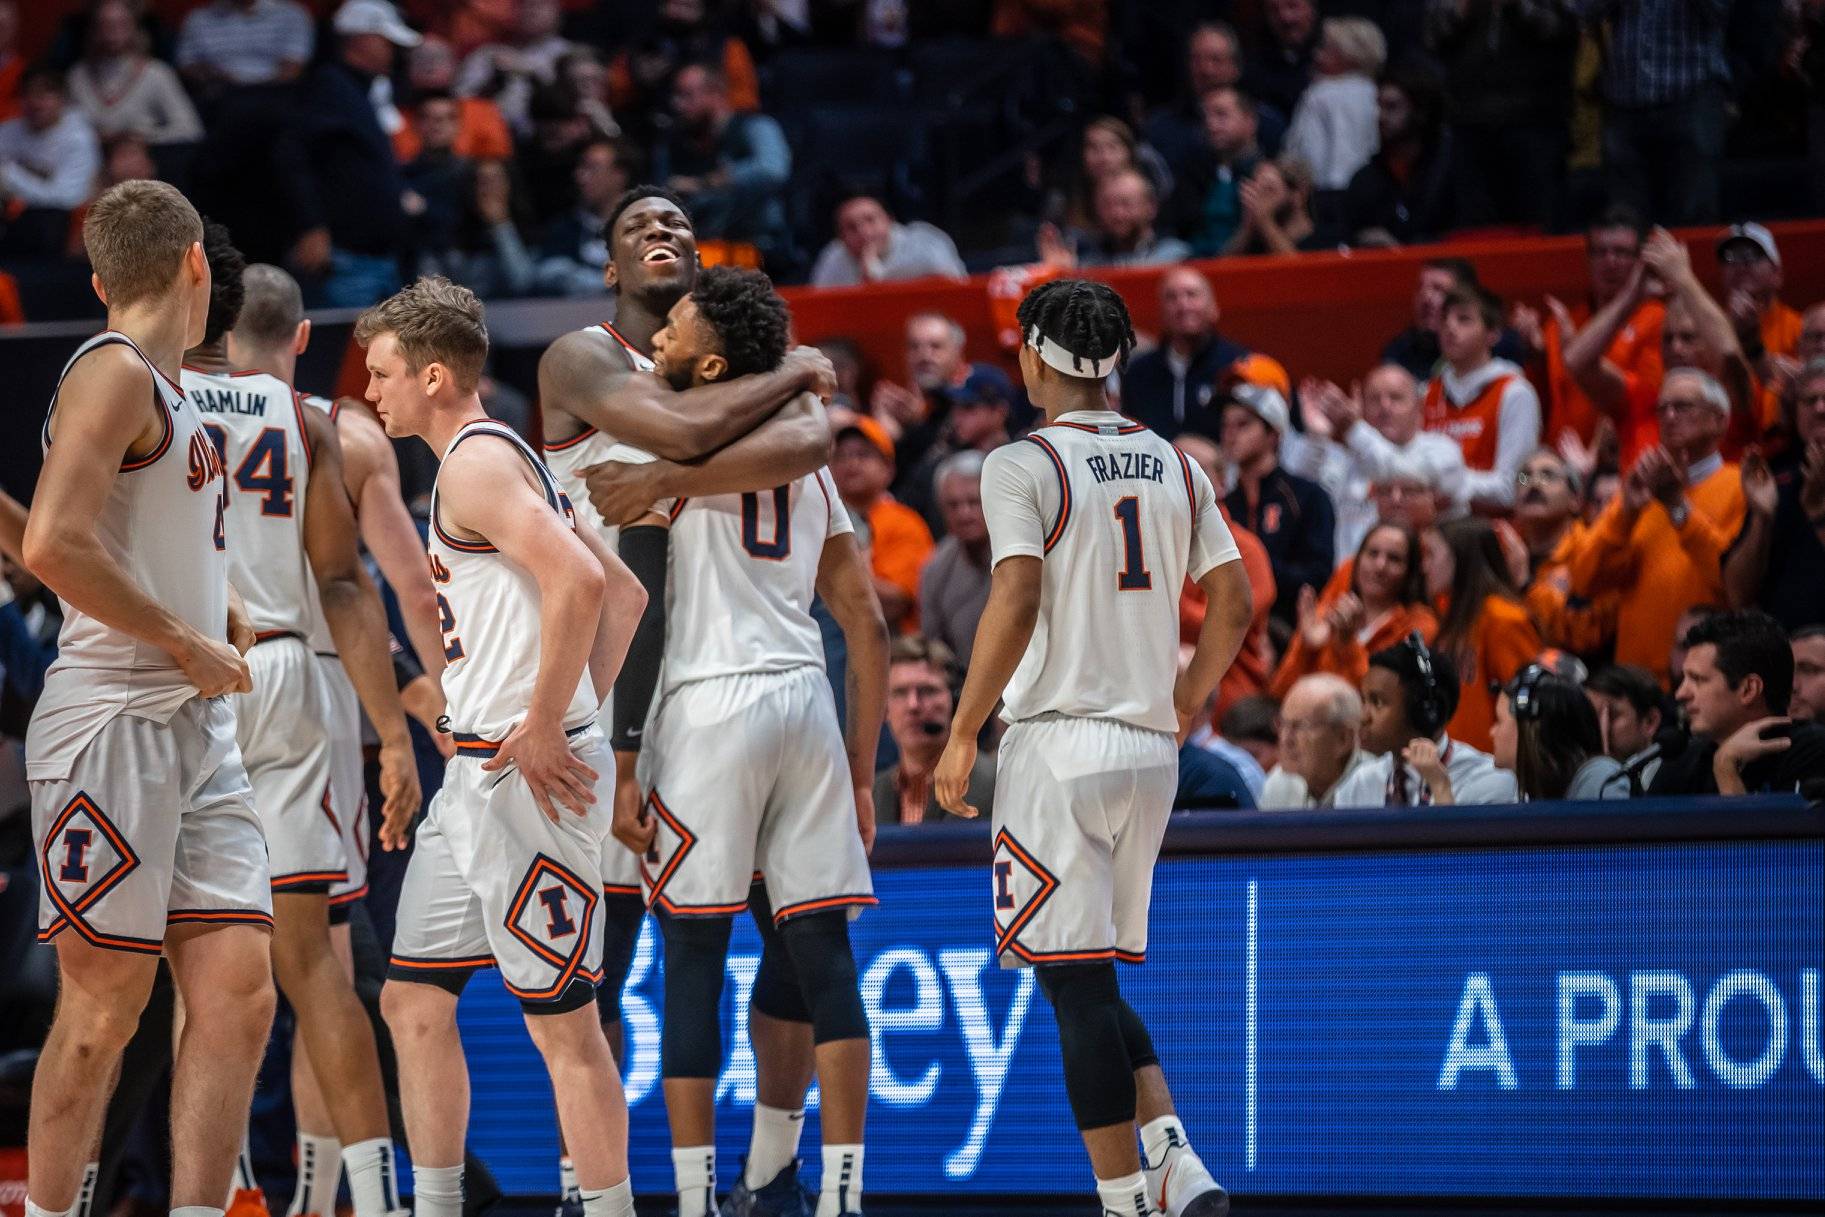 Illini Hoops is ranked, so let’s revisit our Power Rankings